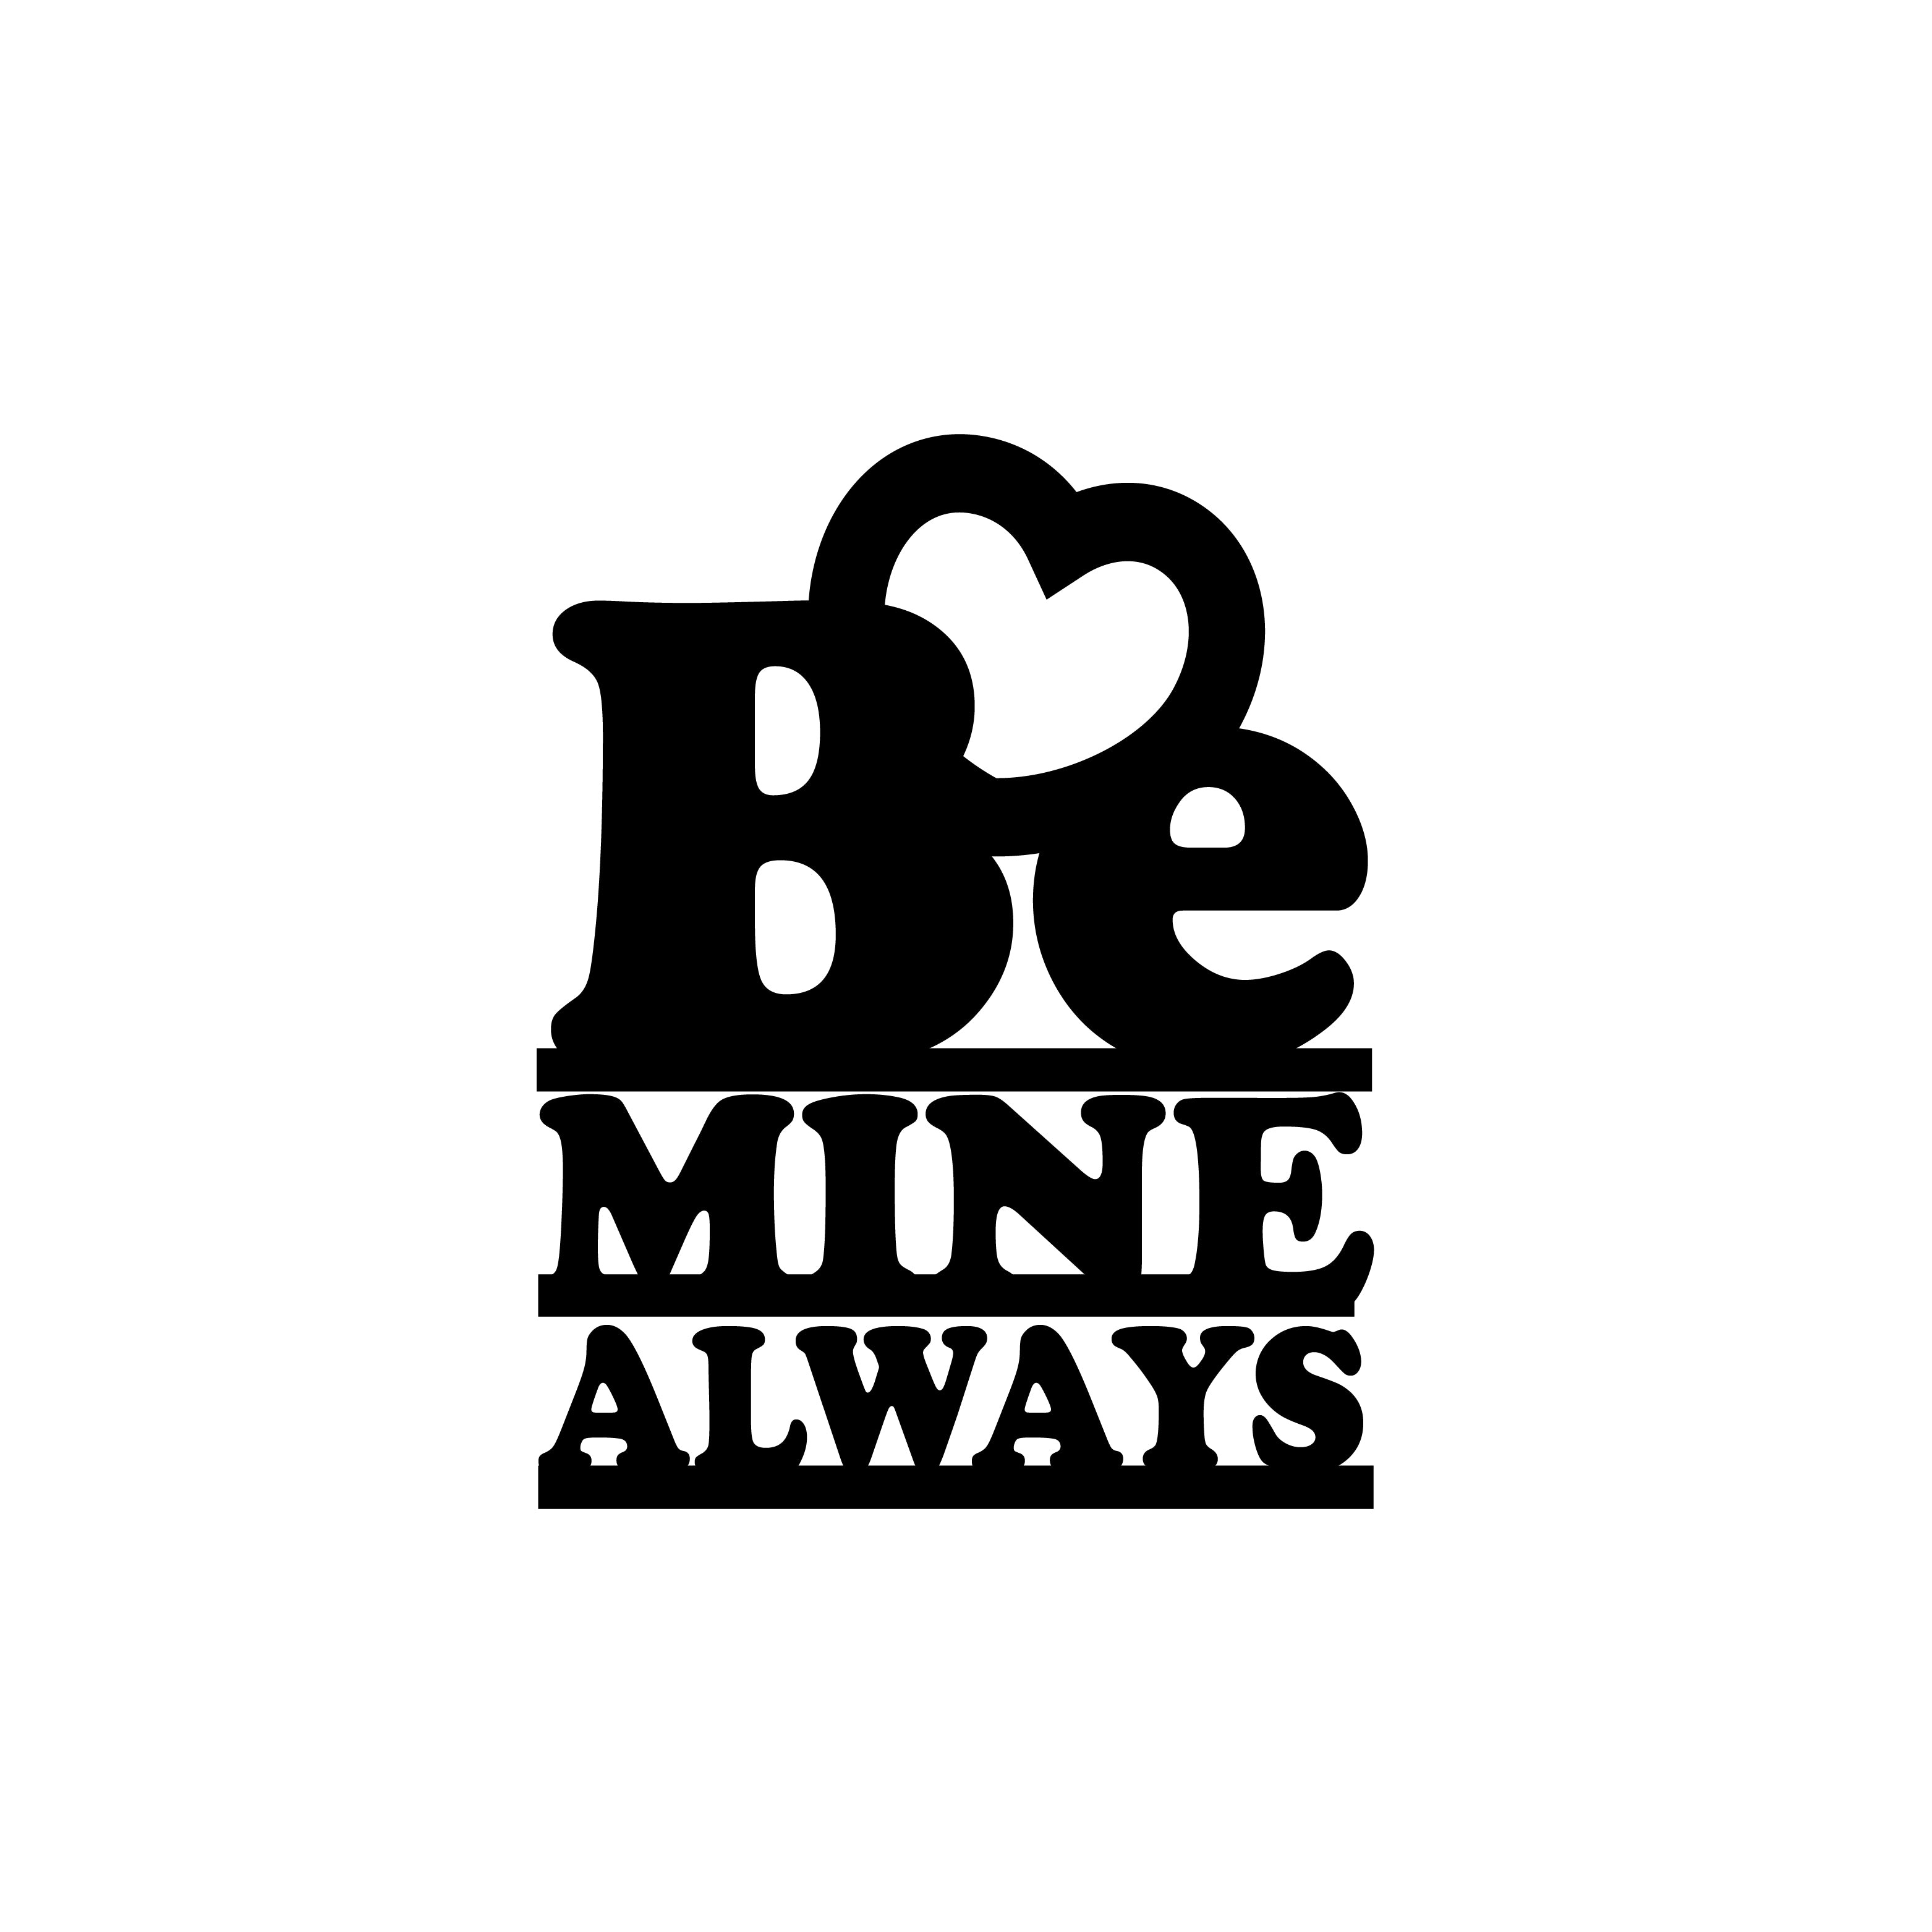 "Be Mine Always" Black Engineered Wood Wall Art Cutout, Ready to Hang Home Decor 2